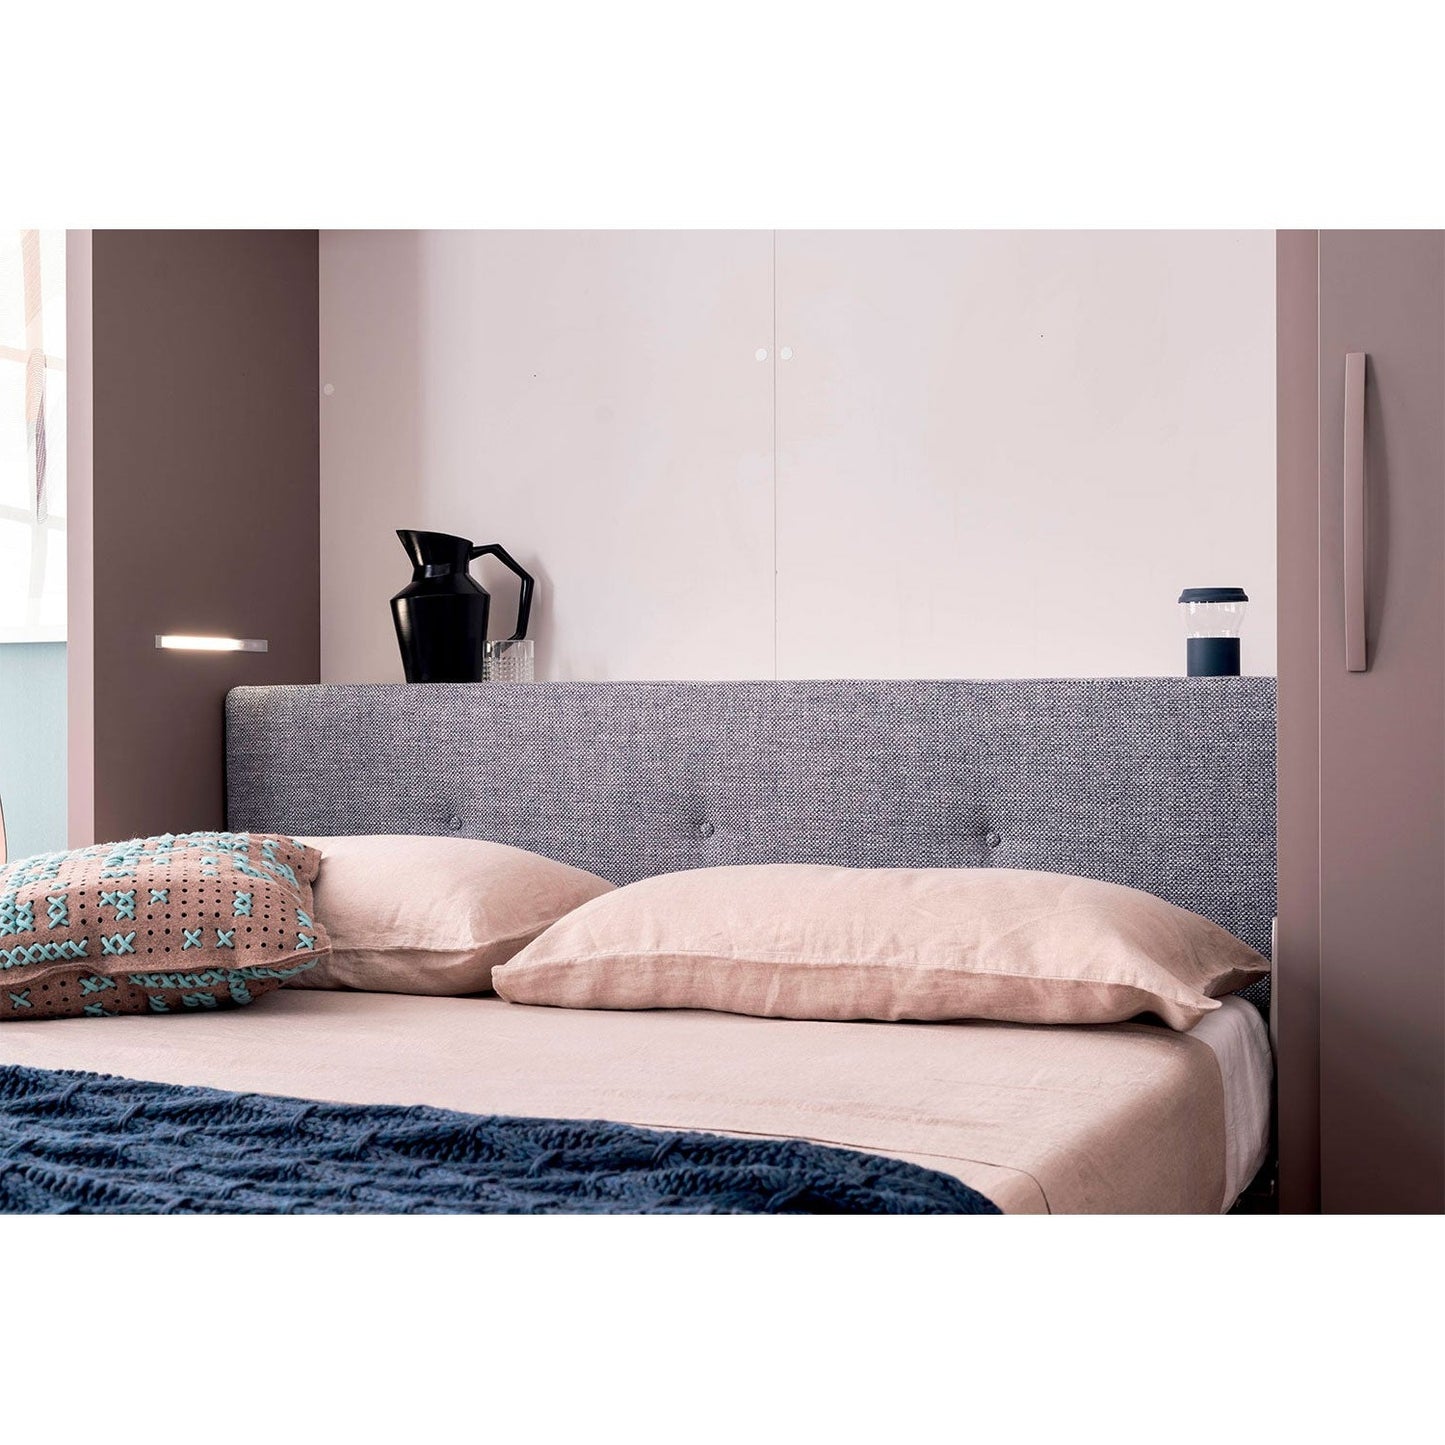 IM20-05 Foldaway Bed by Clever